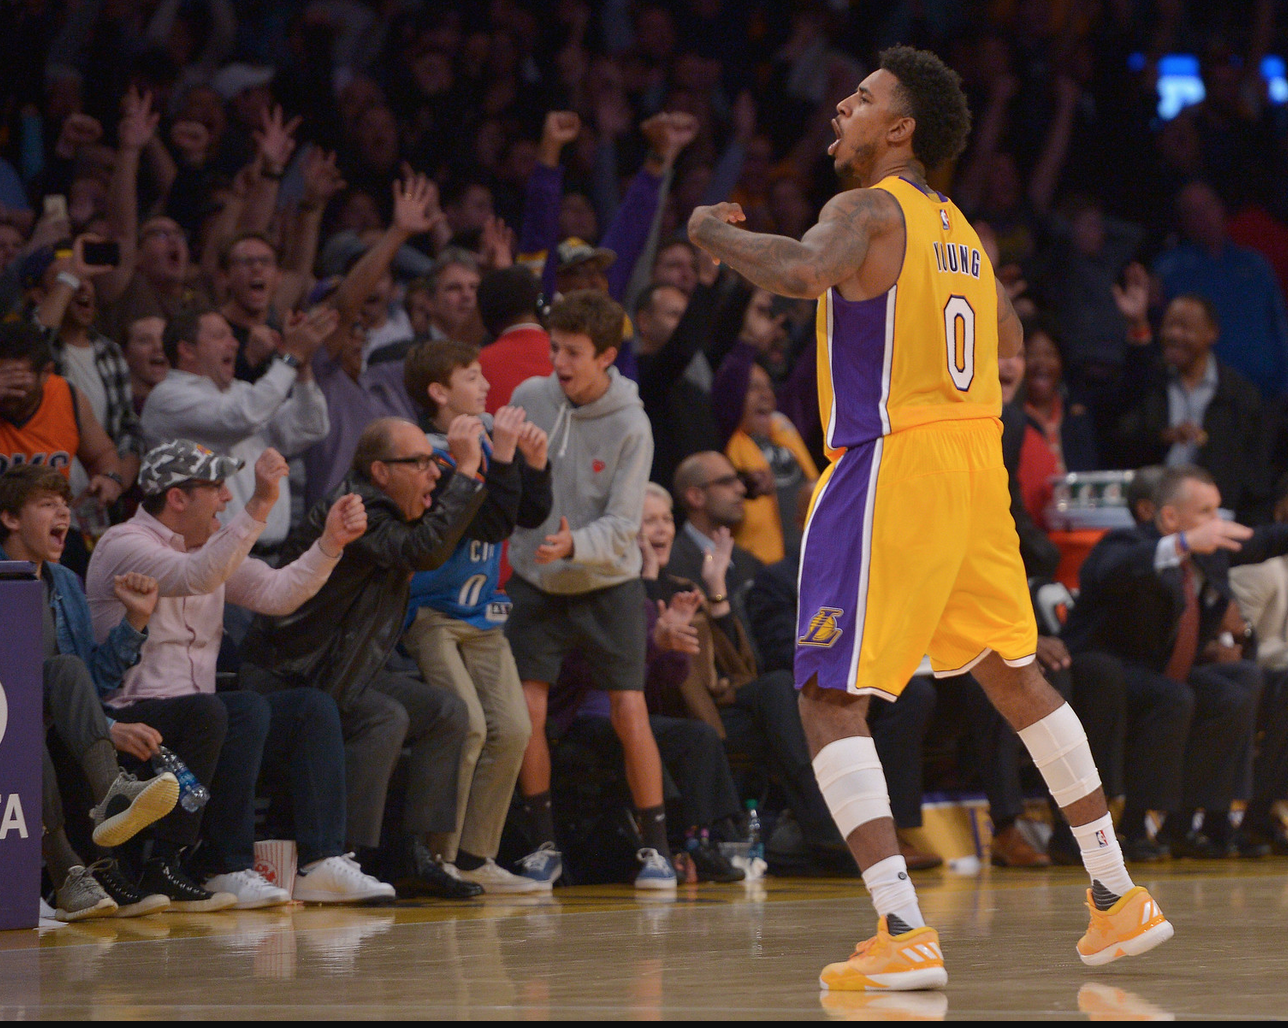 Los Angeles Lakers guard Nick Young #0 celebrates after making the game winning 3-pointer. The Los Angeles Lakers defeated the Oklahoma City Thunder 111-109 at Staples Center in Los Angeles, CA 11/22/2016. Photo by John McCoy/Los Angeles Daily News (SCNG)